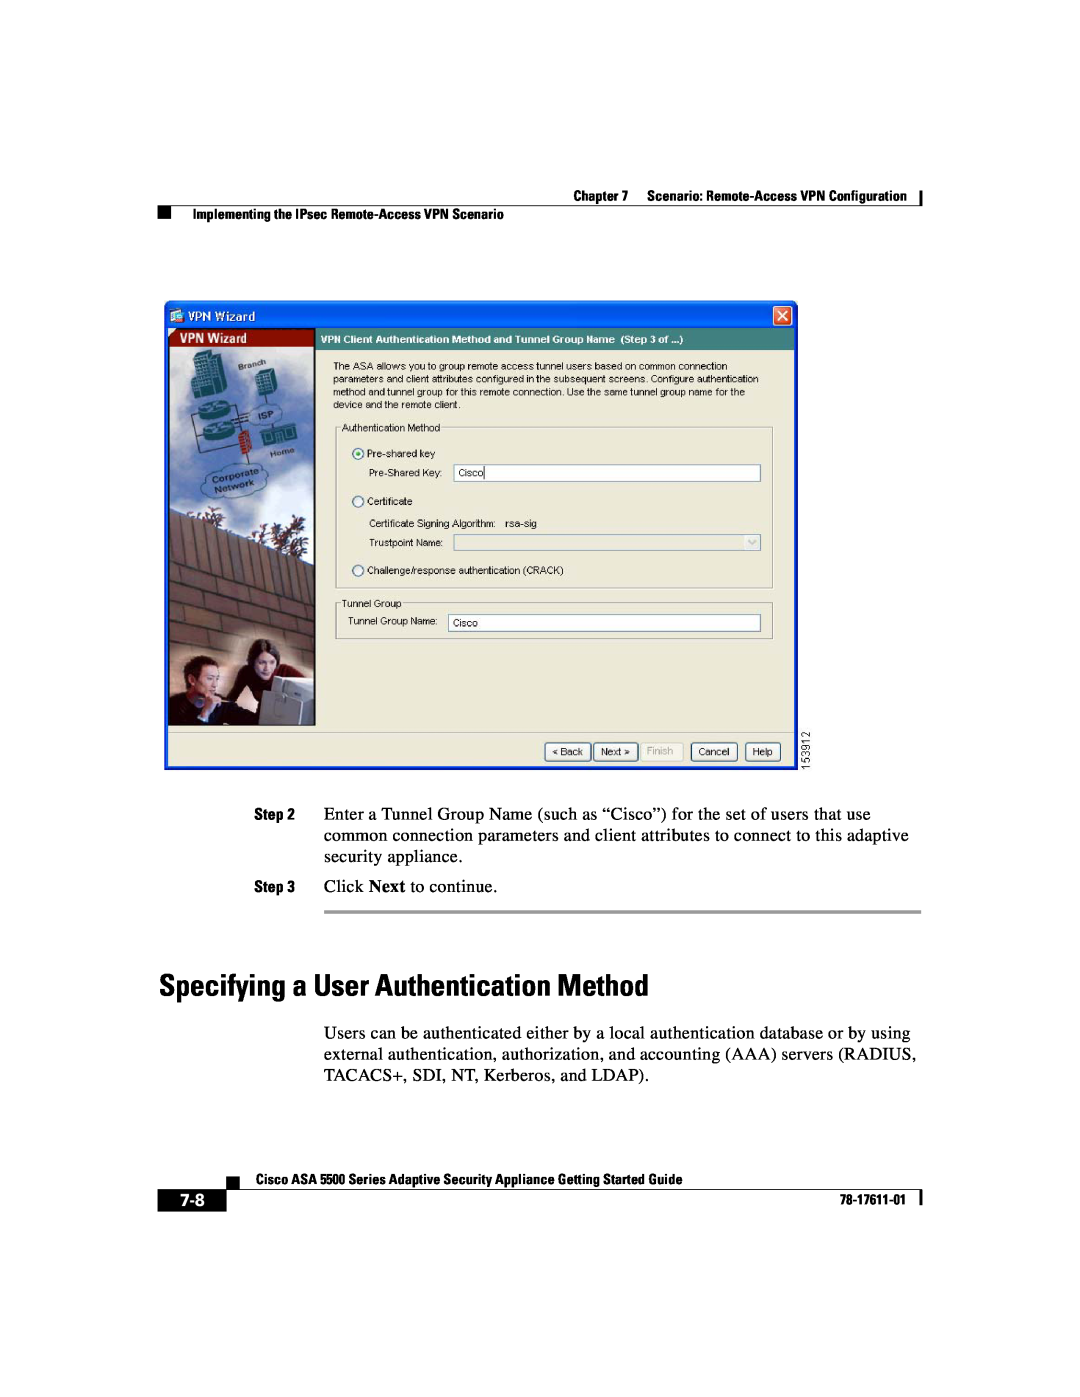 Cisco Systems ASA 5500 manual Specifying a User Authentication Method 